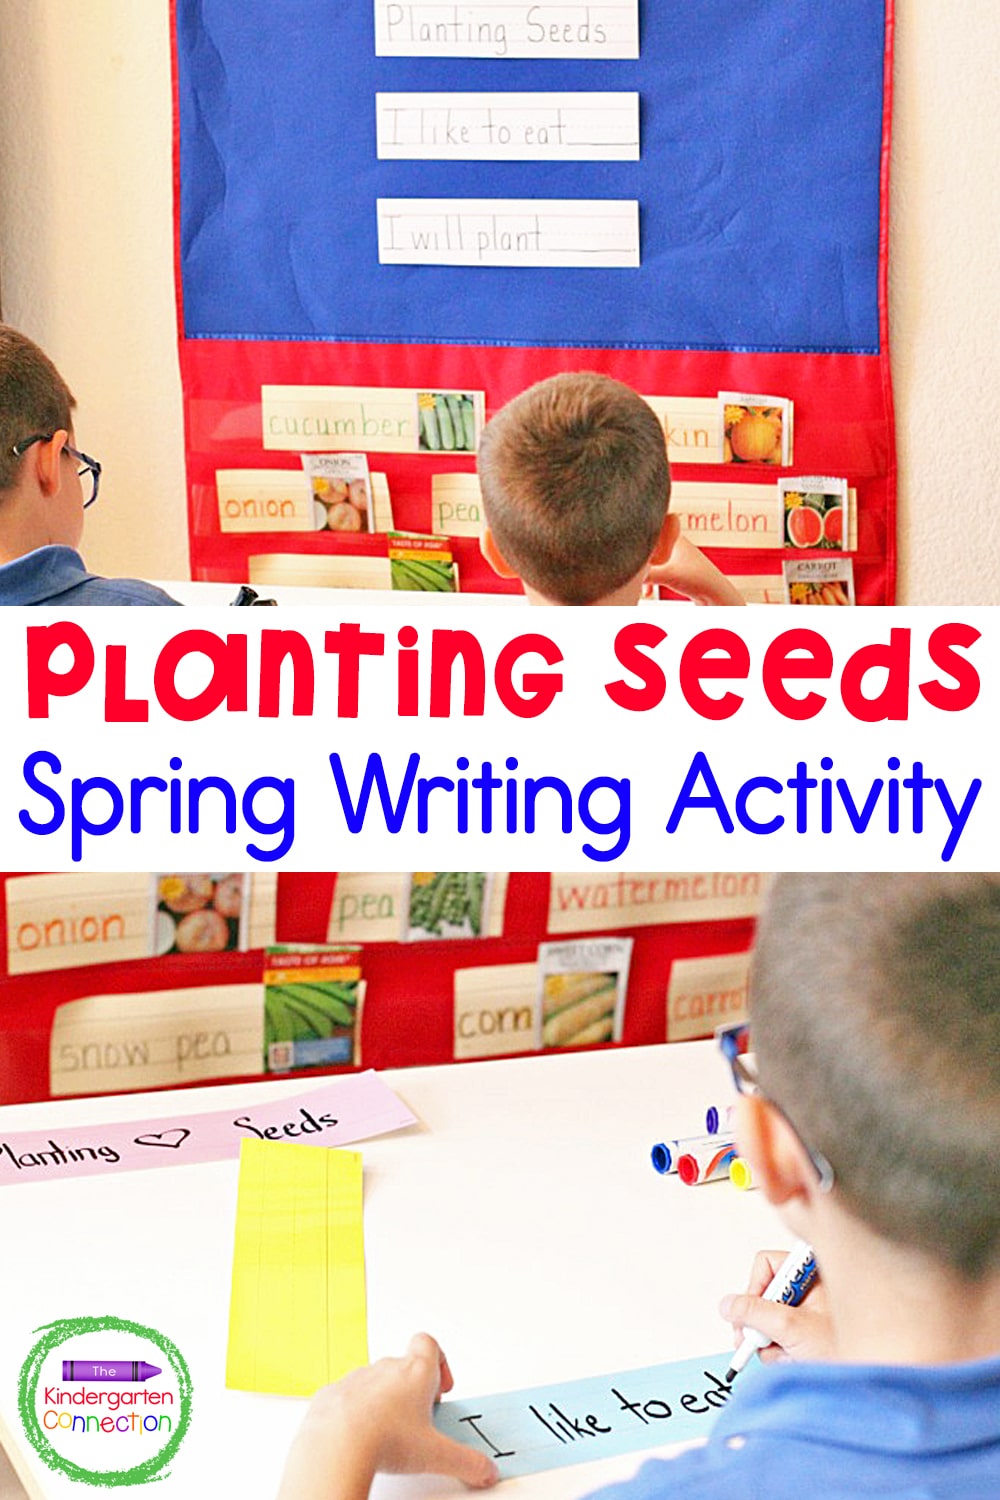 In preparation for springtime, I want to share a wonderful Planting Seeds Spring Writing Activity where children are inspired to write for fun!